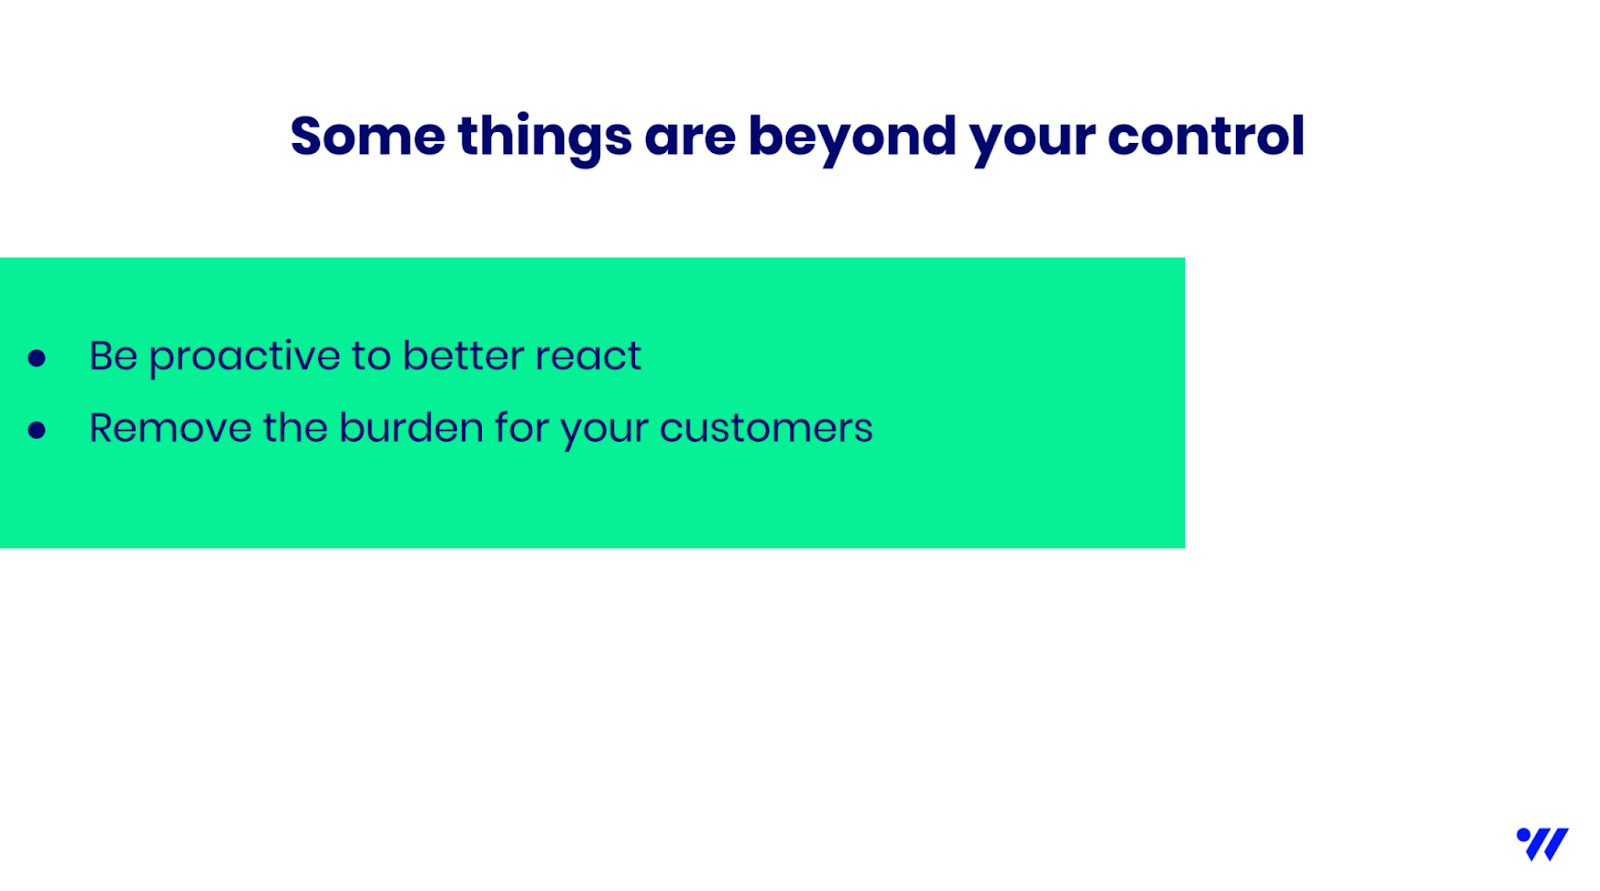 Some things are beyond the control of PMMs. So, be proactive and remove the burden for your customers.